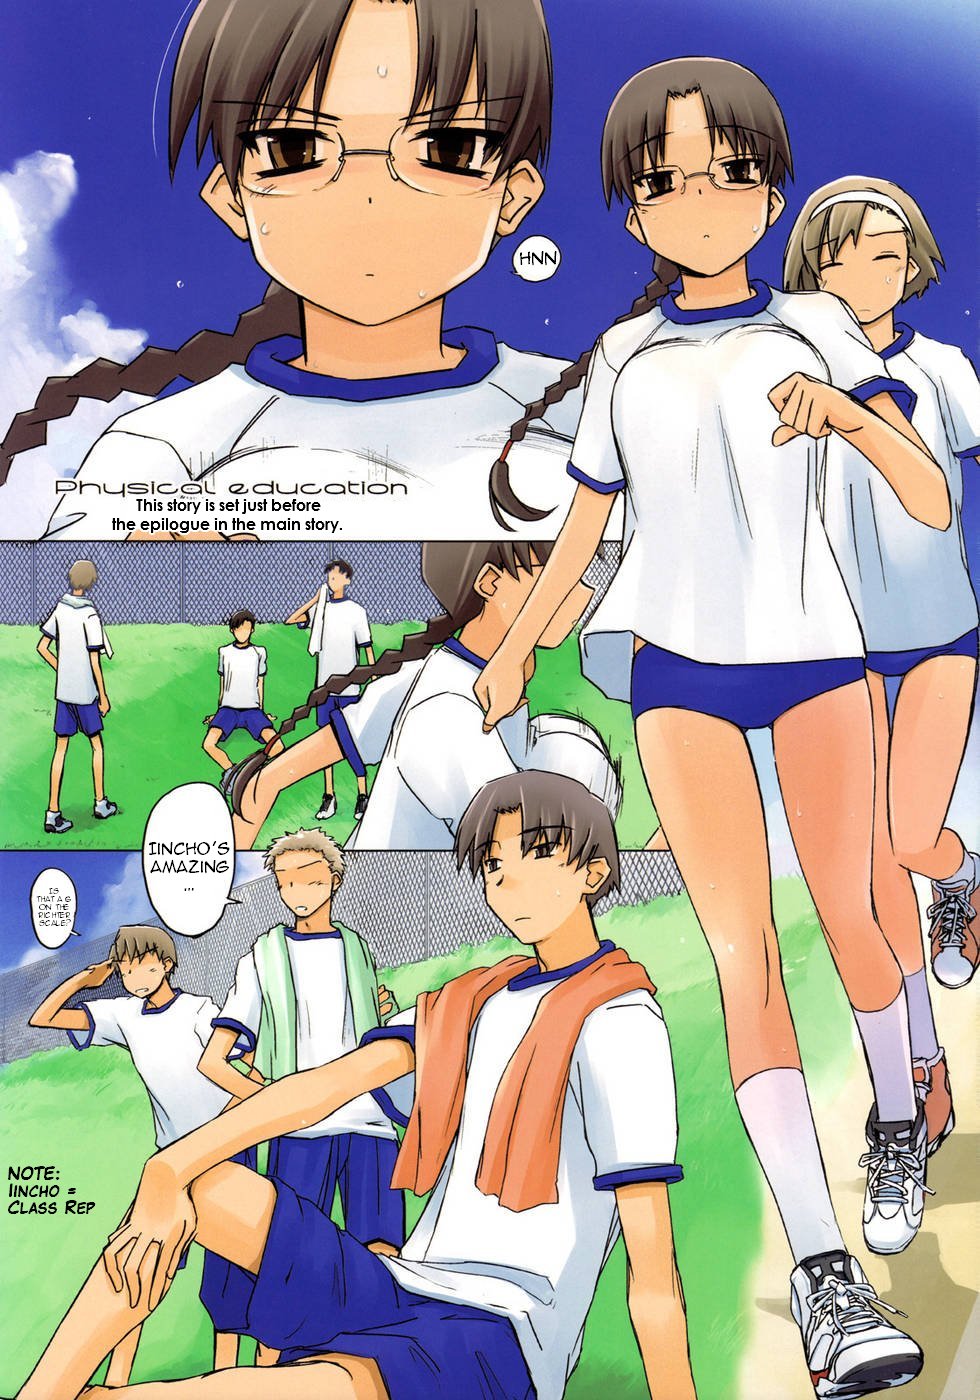 (C78) [Tear Drop (tsuina)] Physical education (To Heart) [English] [Trinity Translations Team] page 3 full